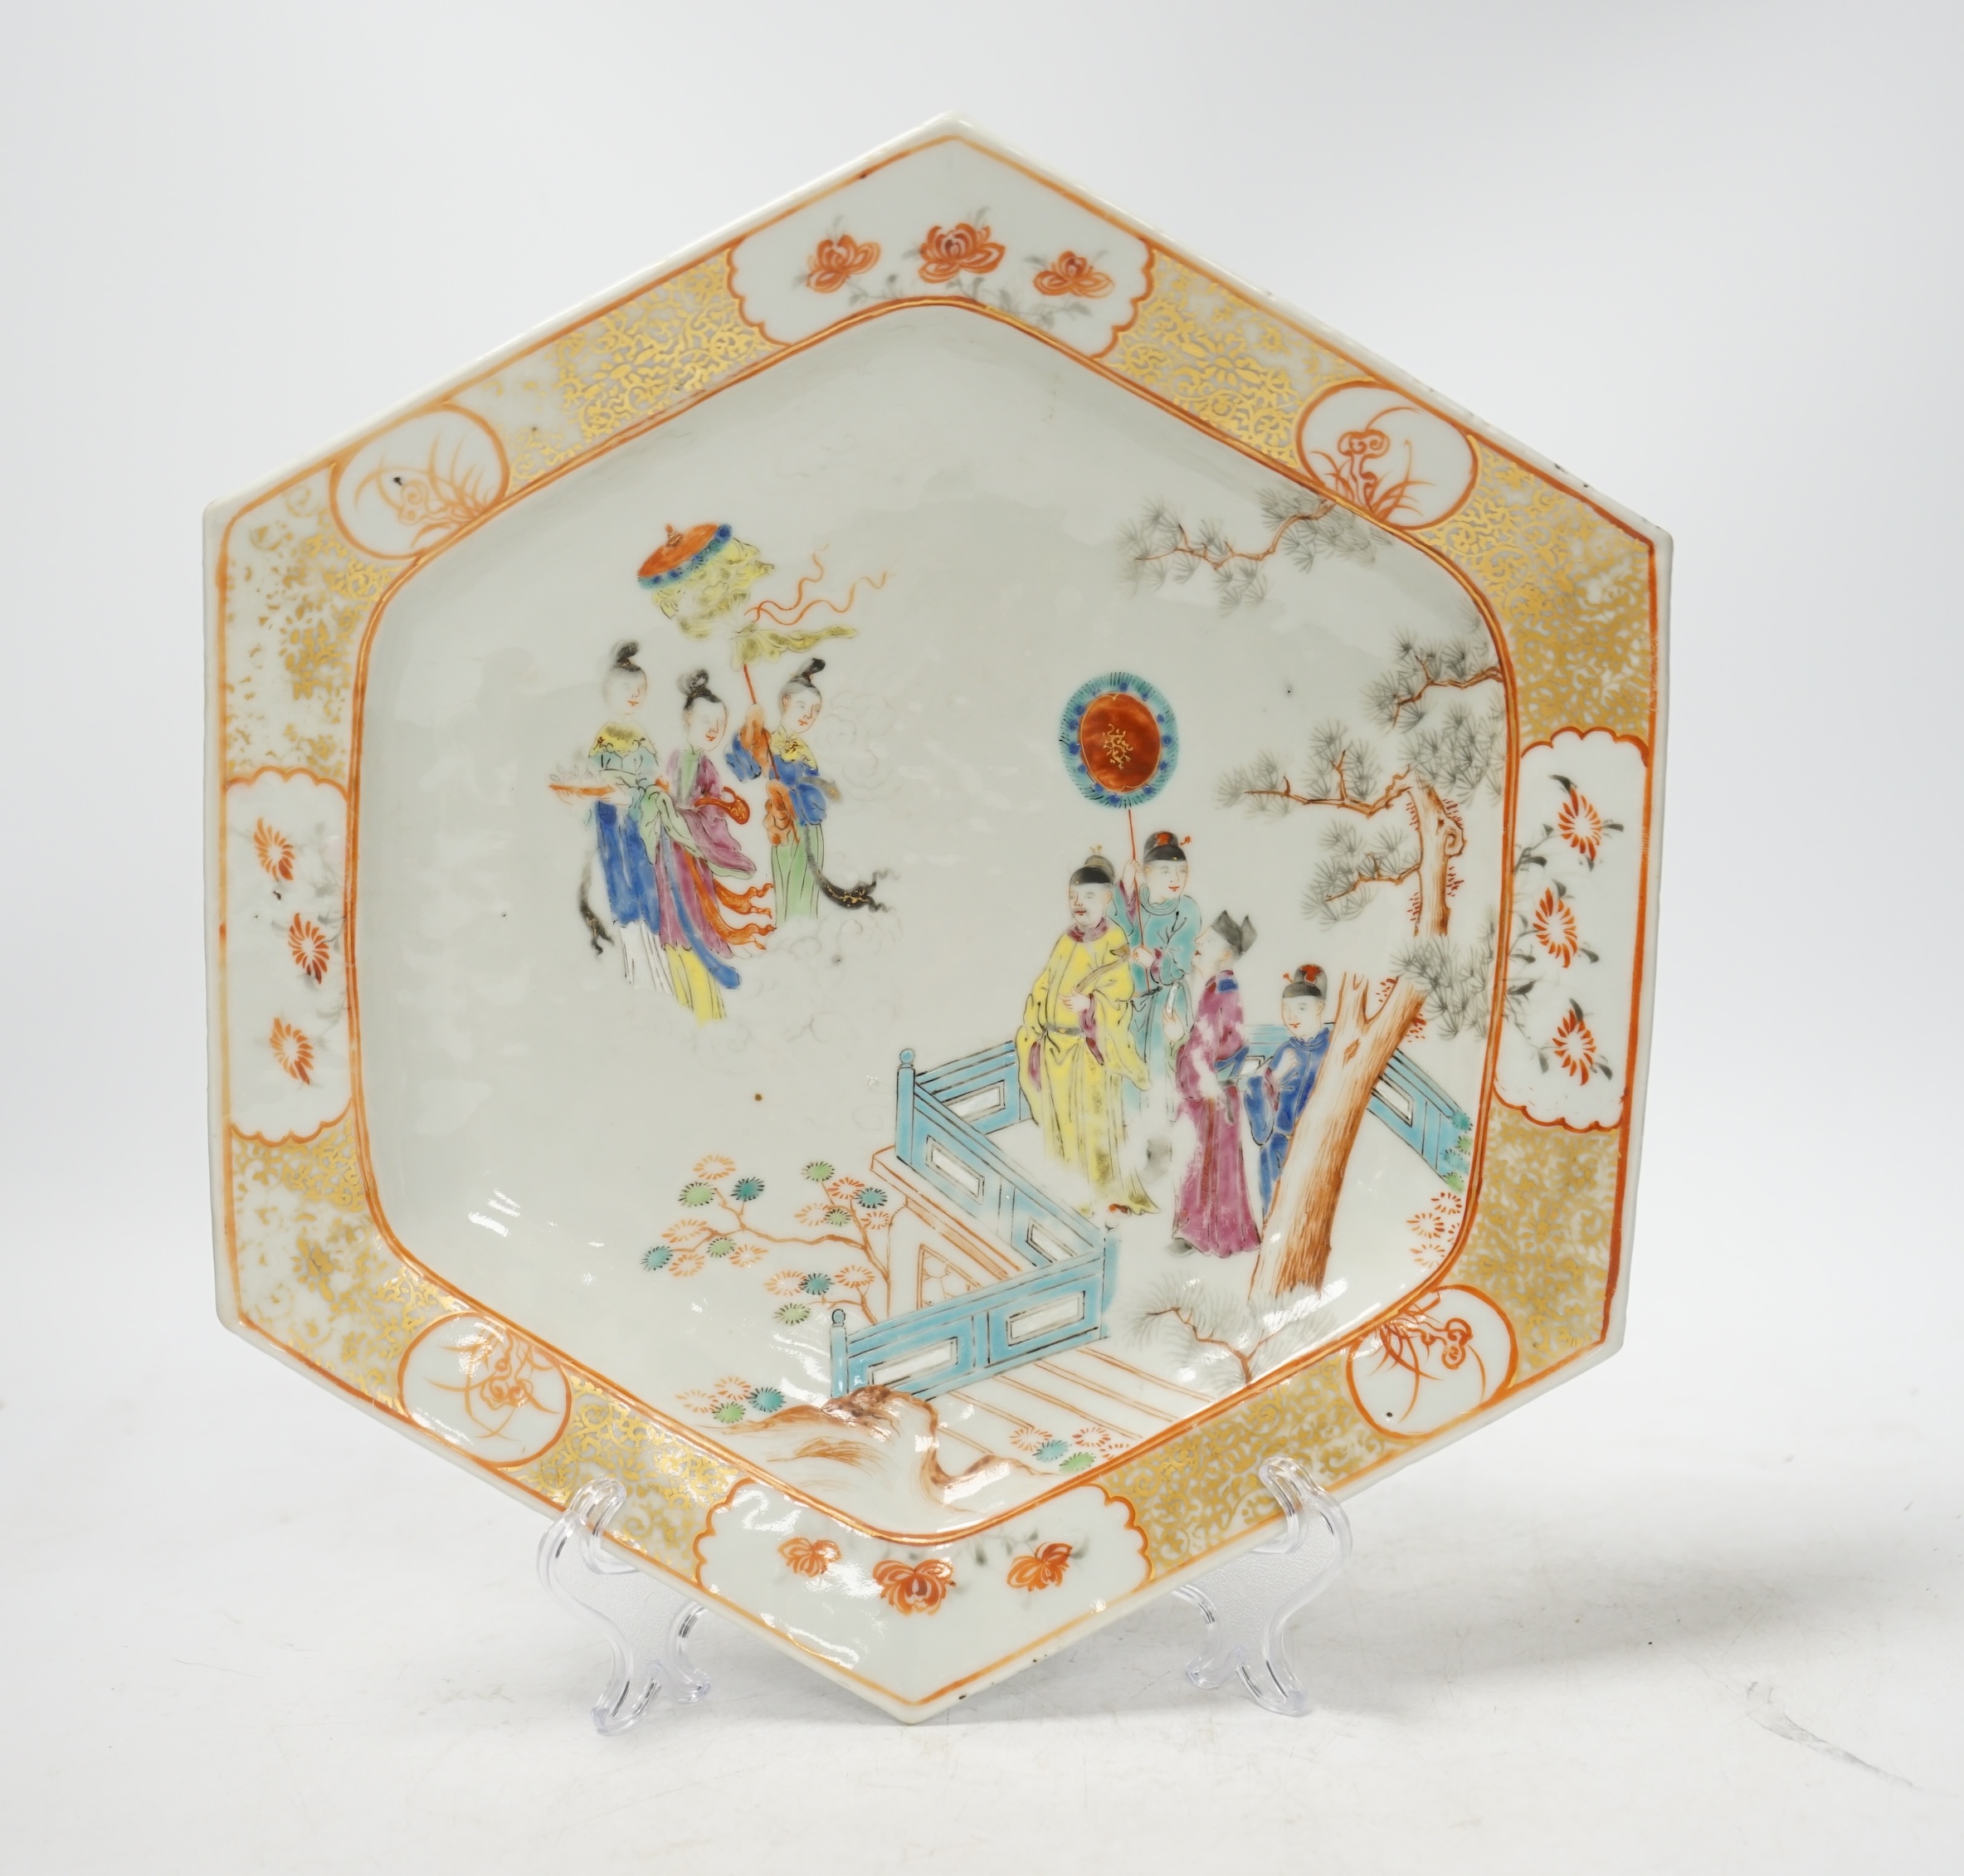 An 18th century Chinese hexagonal dish, painted with figures on a terrace, 28cm wide. Condition - fair, feint star crack to base